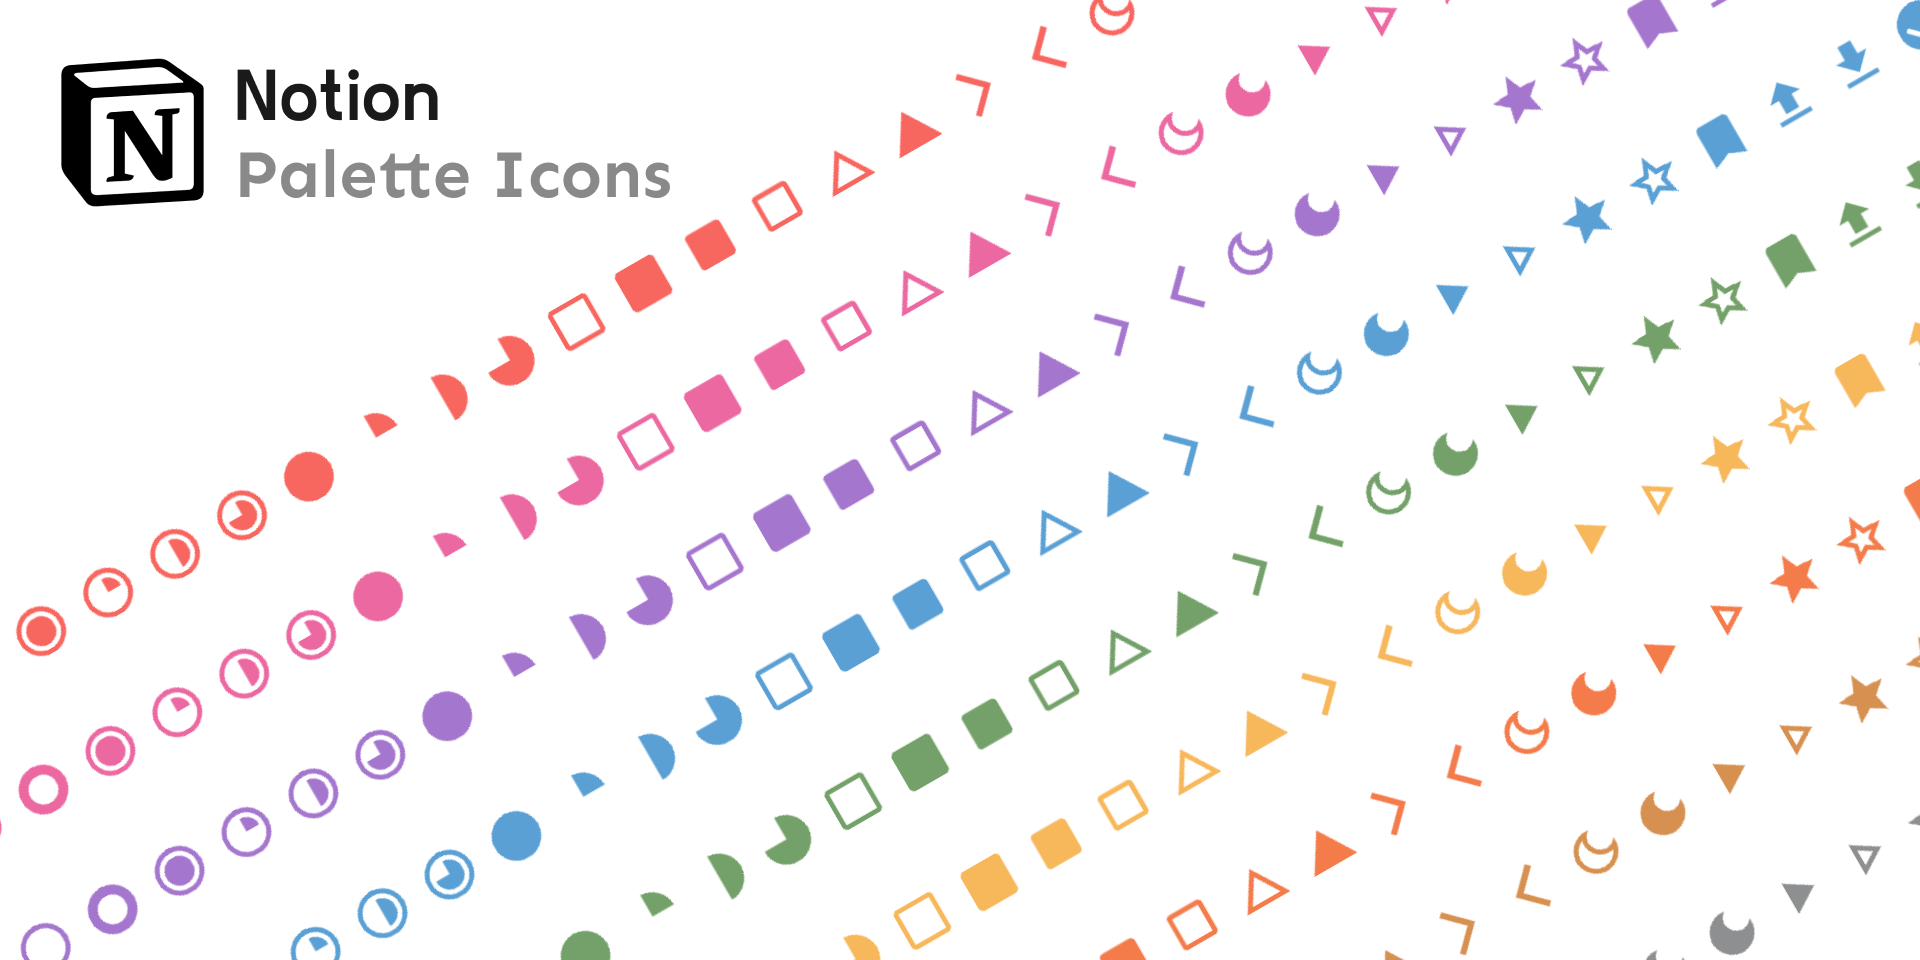 Notion Palette Icons